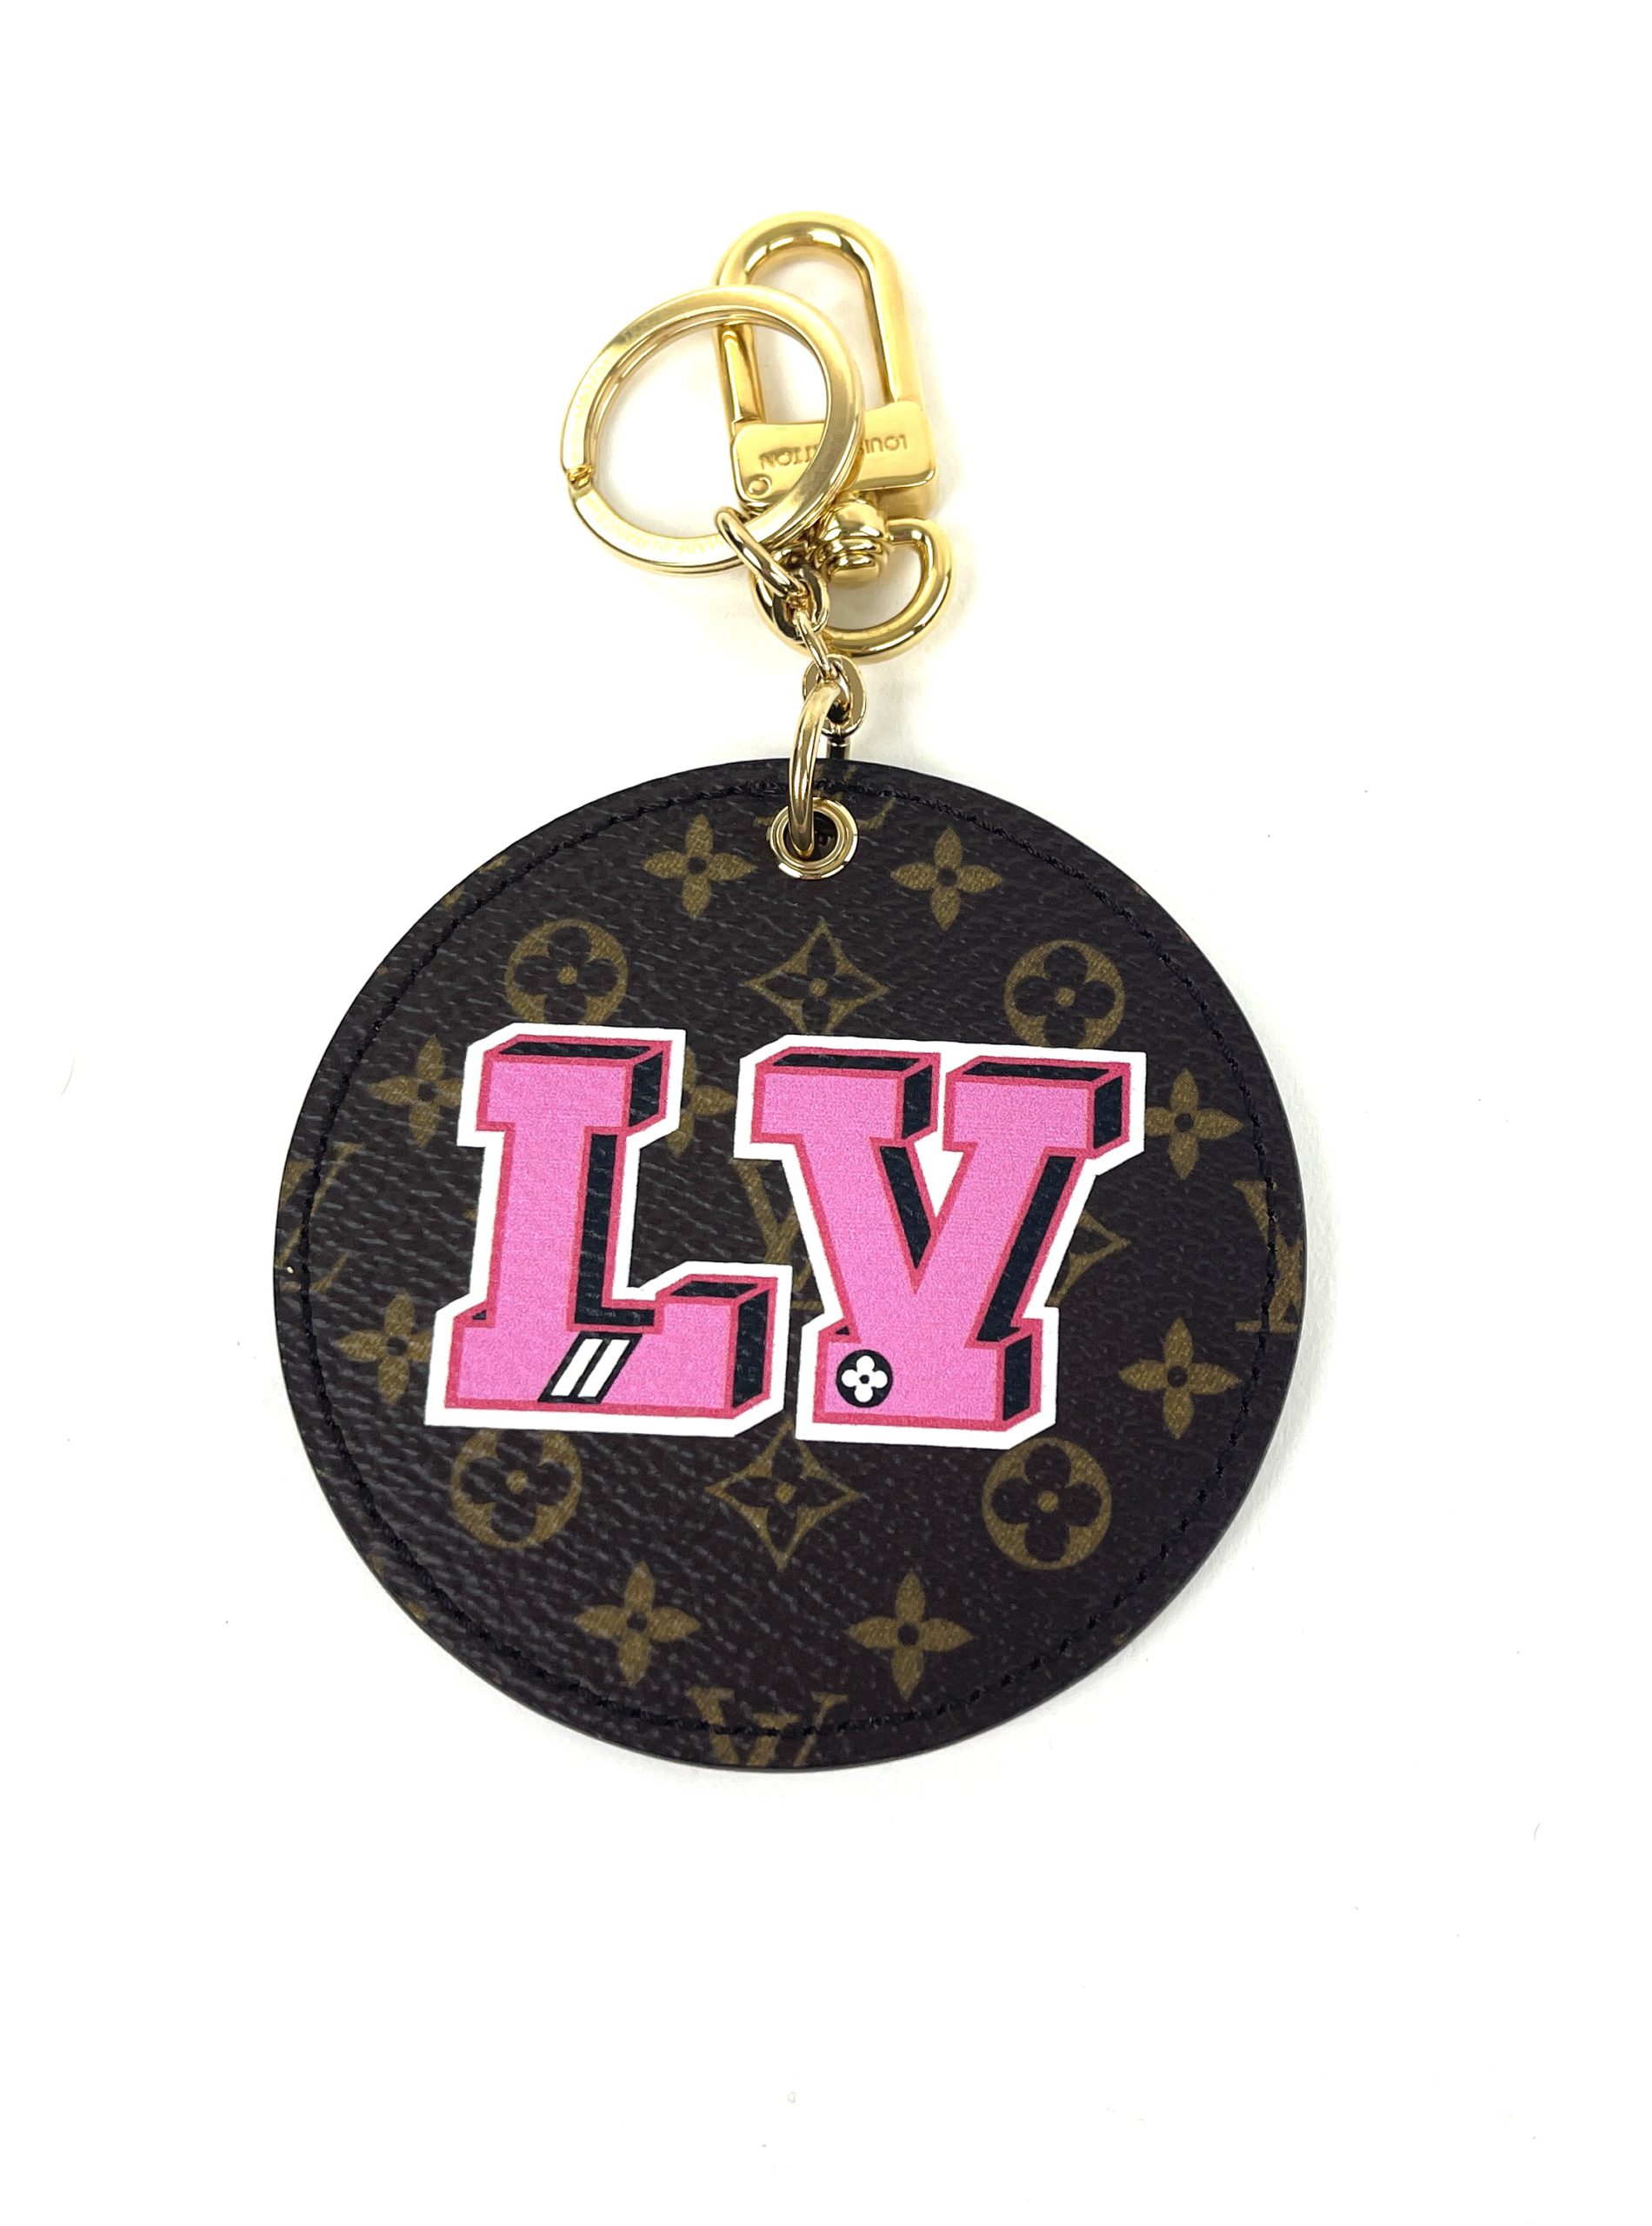 Louis Vuitton Very Key Holder and Bag Charm